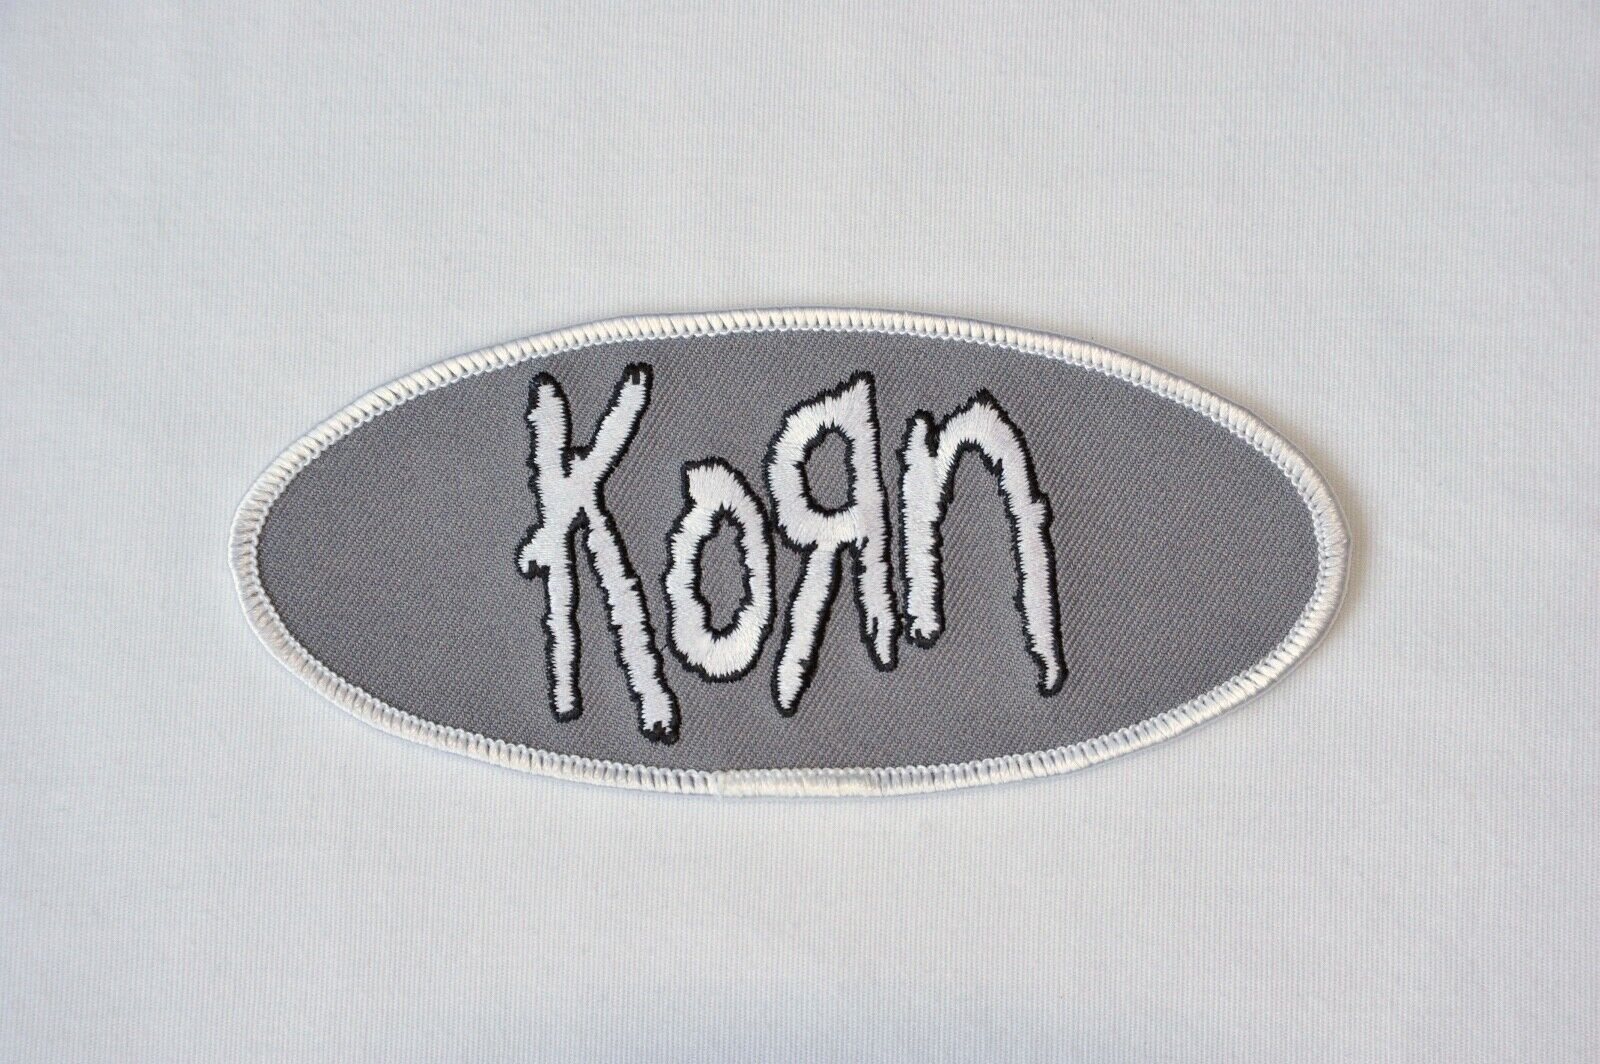 Korn Embroidered Patch - Metal - 90s - Nu-metal - Band Patch - Davis